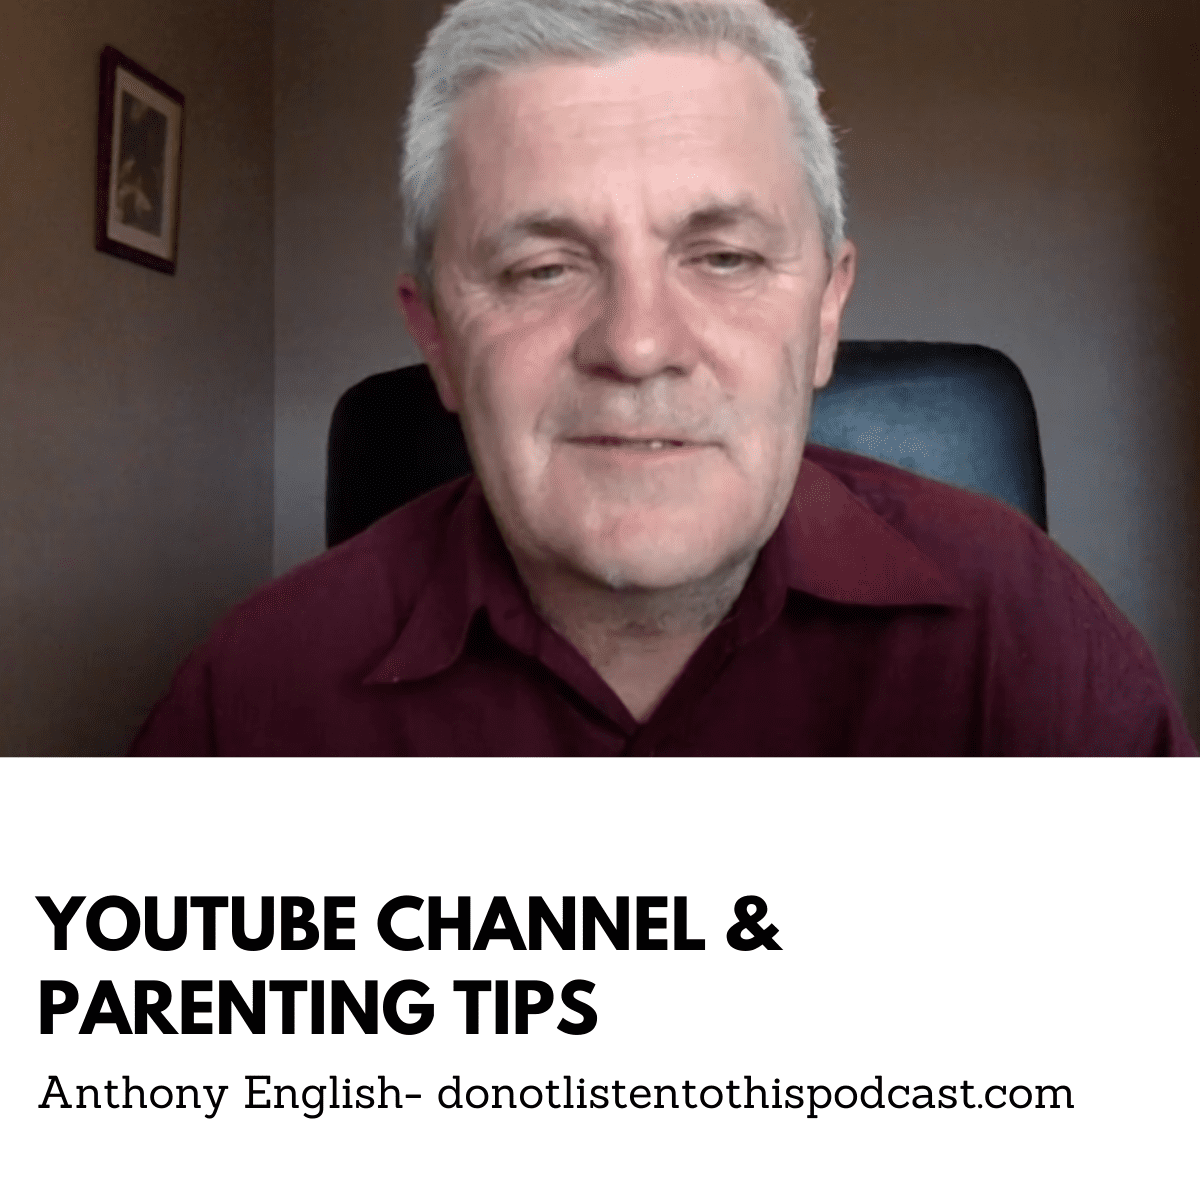 YouTube Channel & Parenting Tips – Anthony English